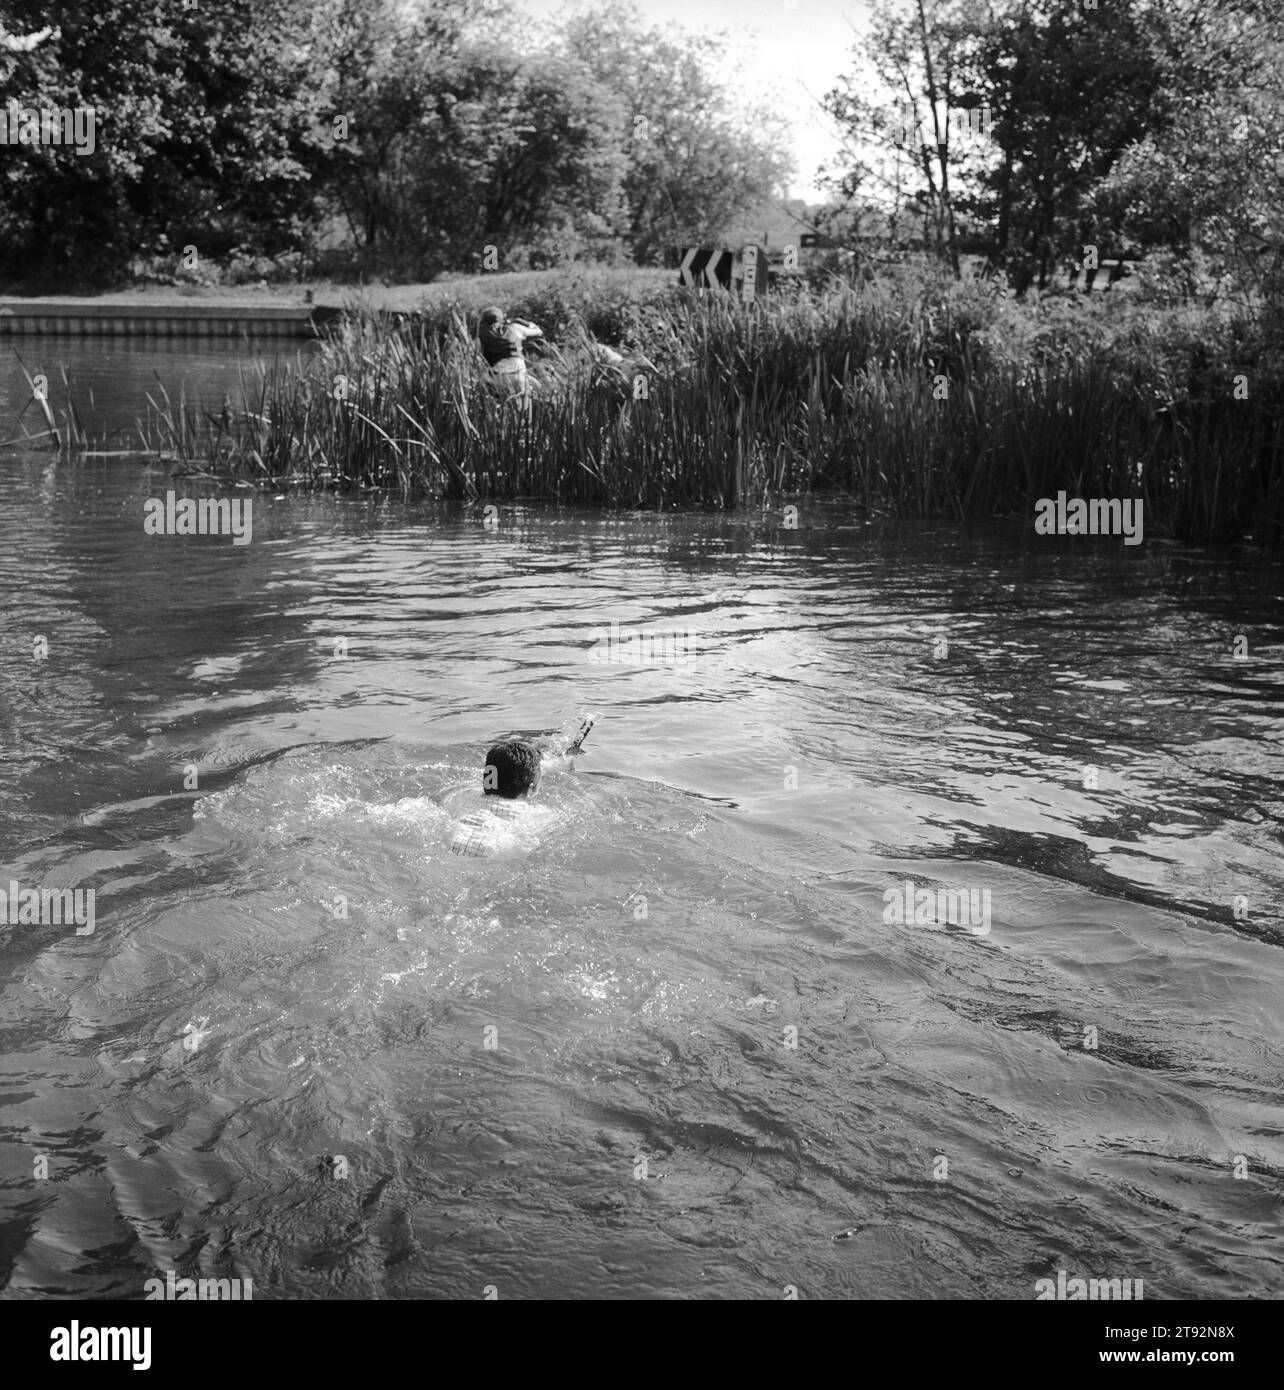 Mink Hunting UK.  The Valley Minkhounds, Whipper-in, Simon Haines, swims across the river Kennet following the hounds who are in pursuit of their quarry. Near Aldermaston, Berkshire. 2002, 2000s England HOMER SYKES Stock Photo